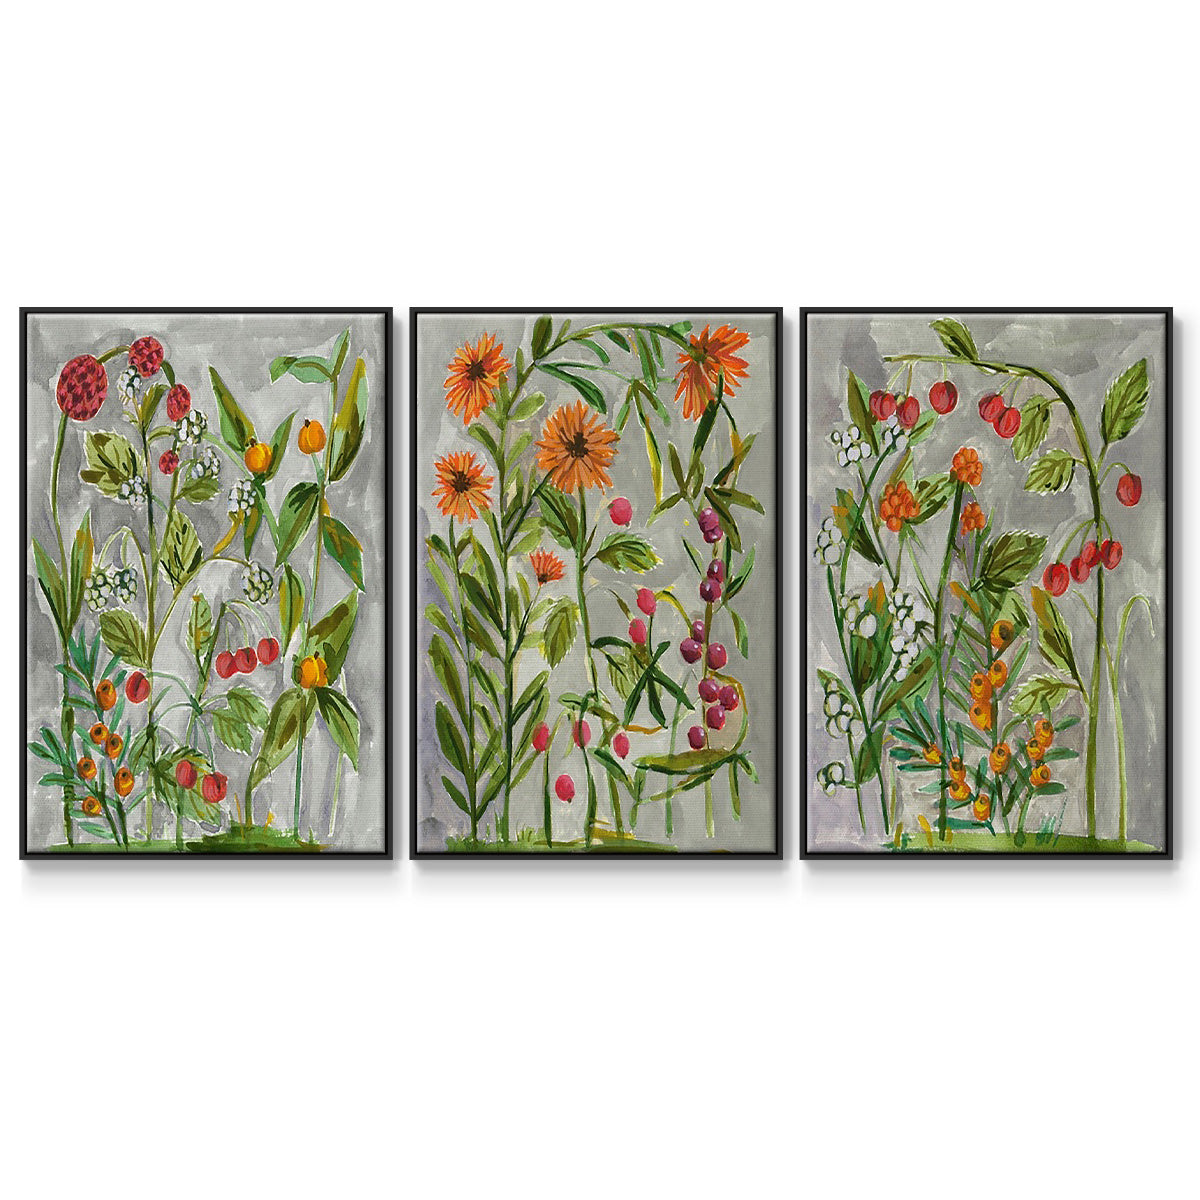 Dear Nature I - Framed Premium Gallery Wrapped Canvas L Frame 3 Piece Set - Ready to Hang